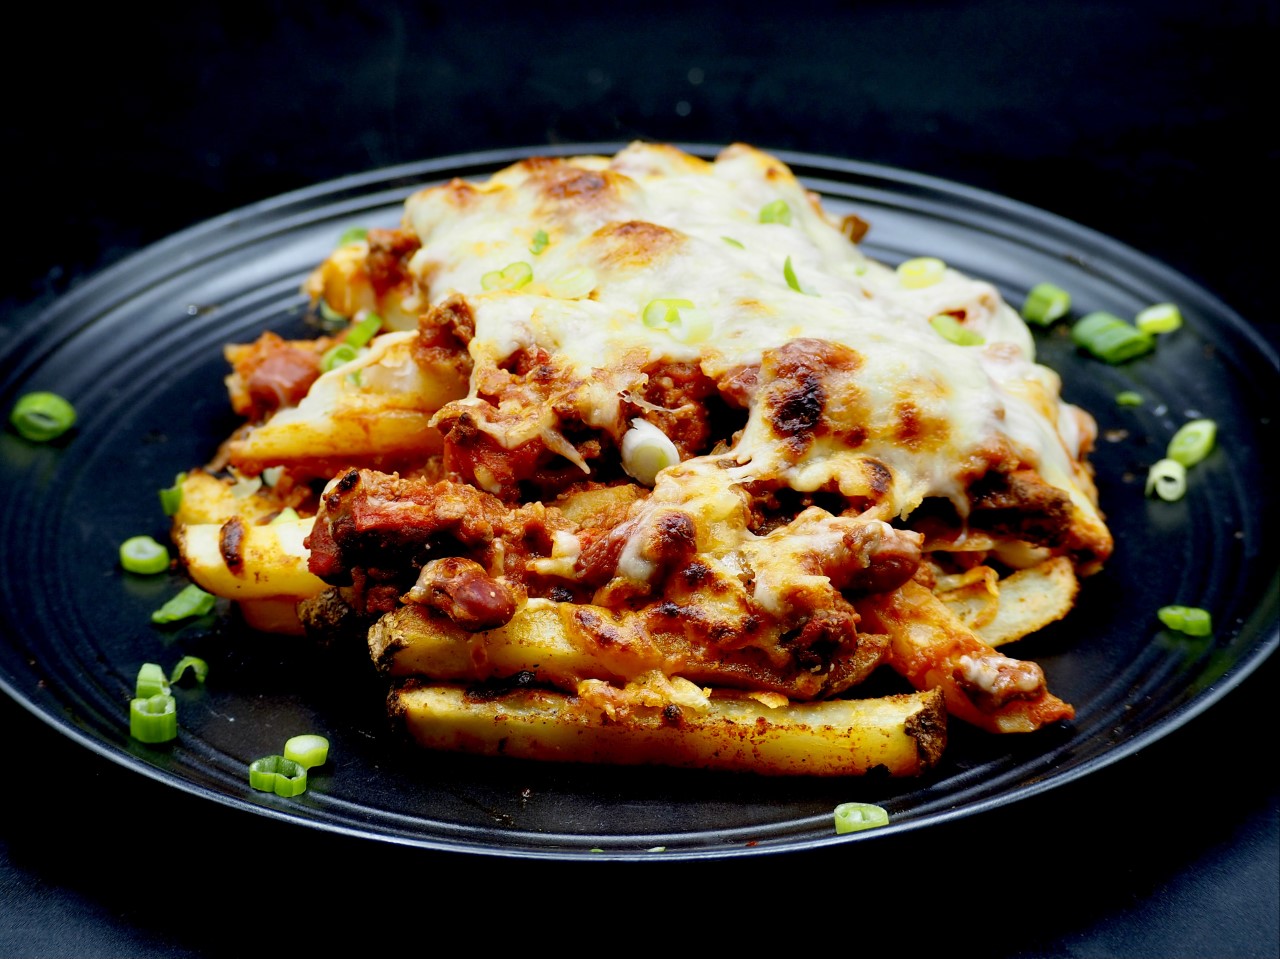 Homemade Loaded Chili Cheese Fries